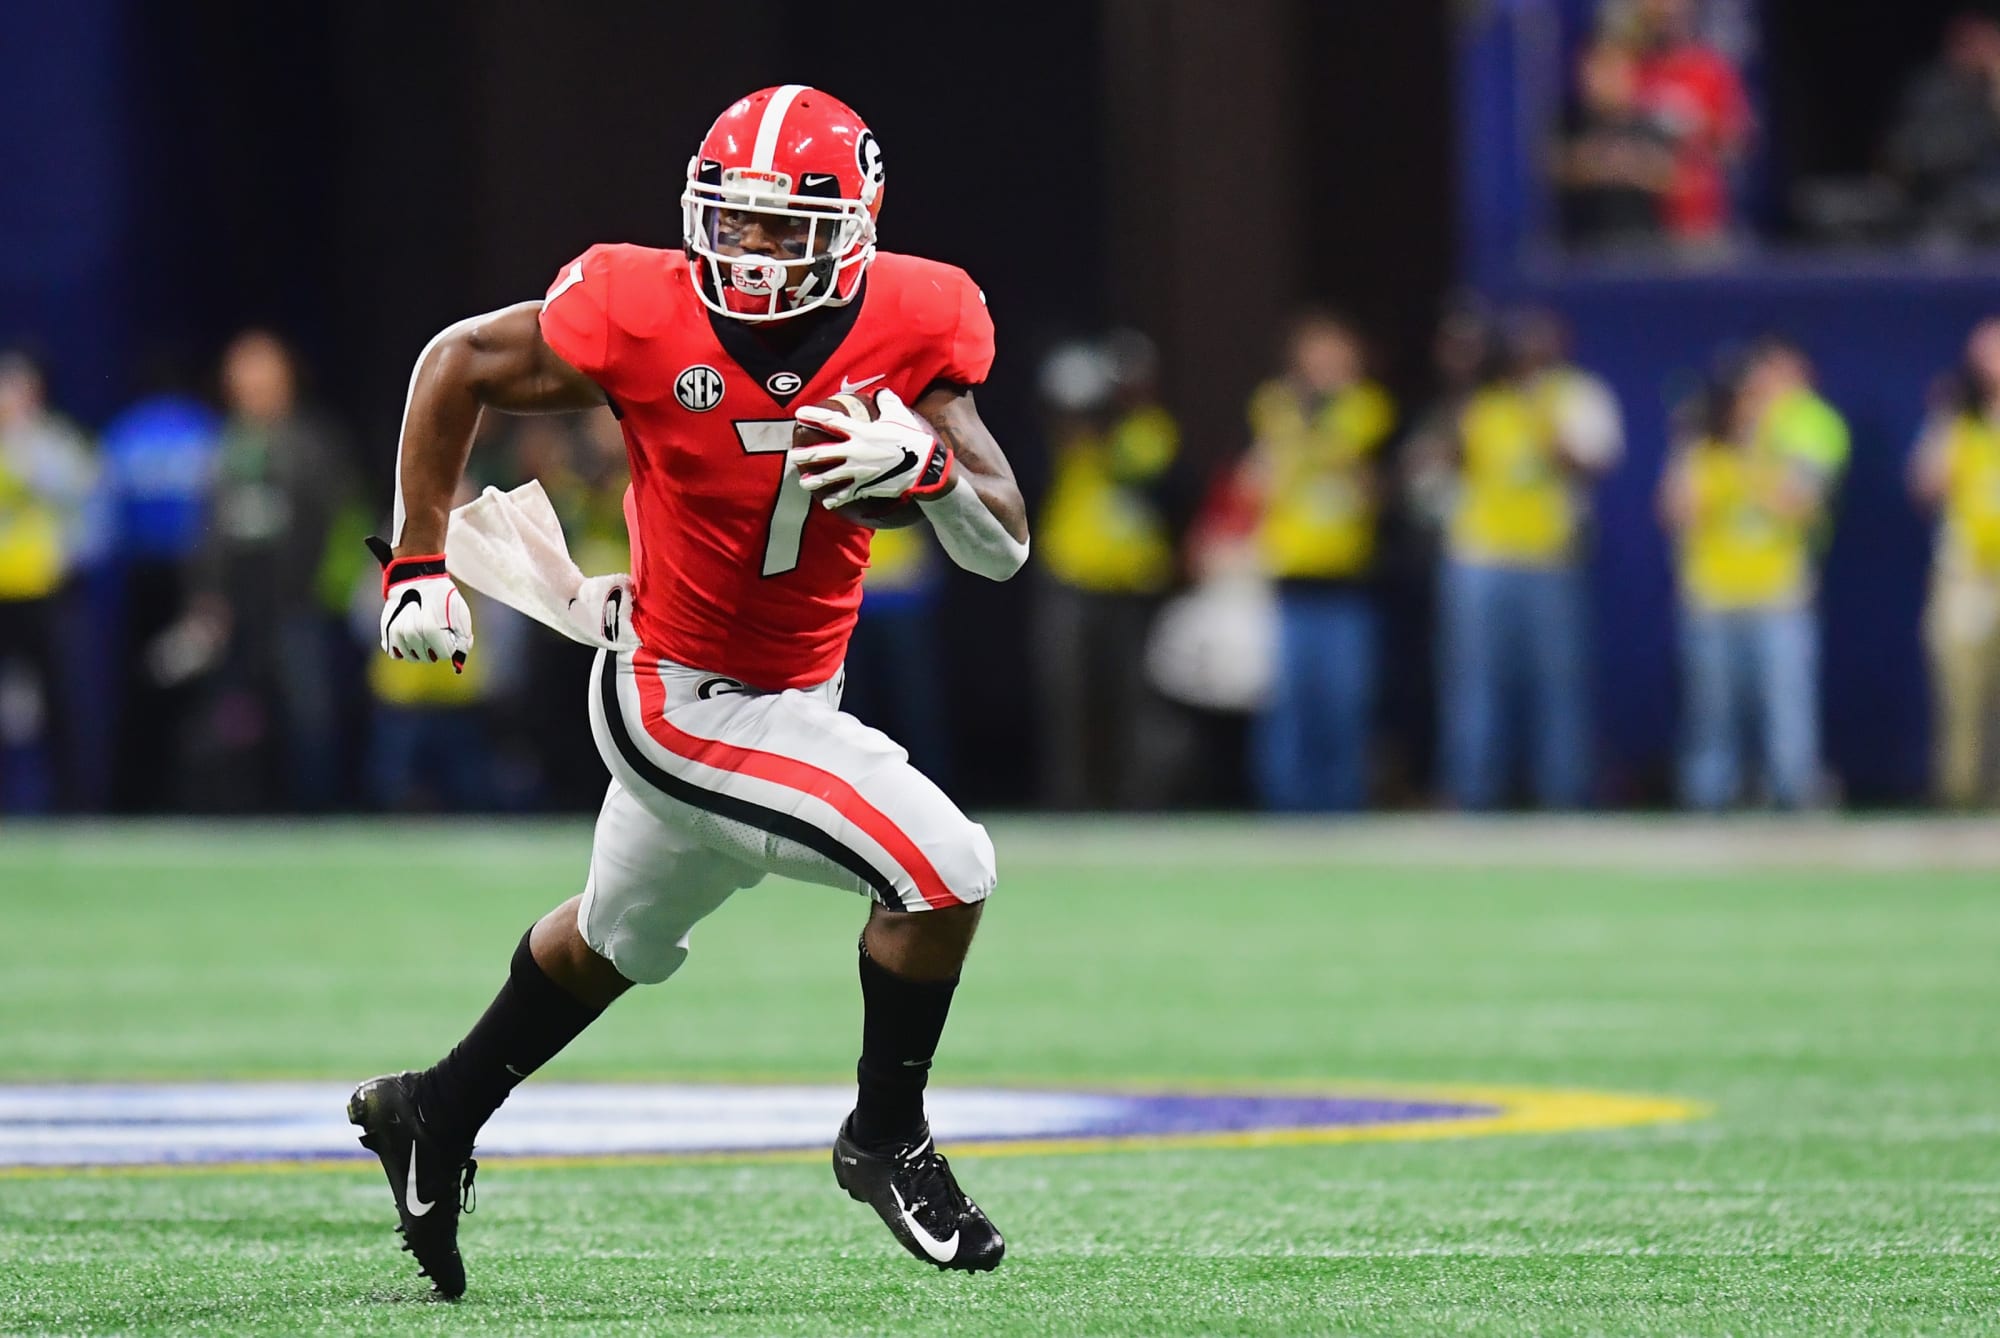 Ranking the 2020 NFL Draft RB prospects